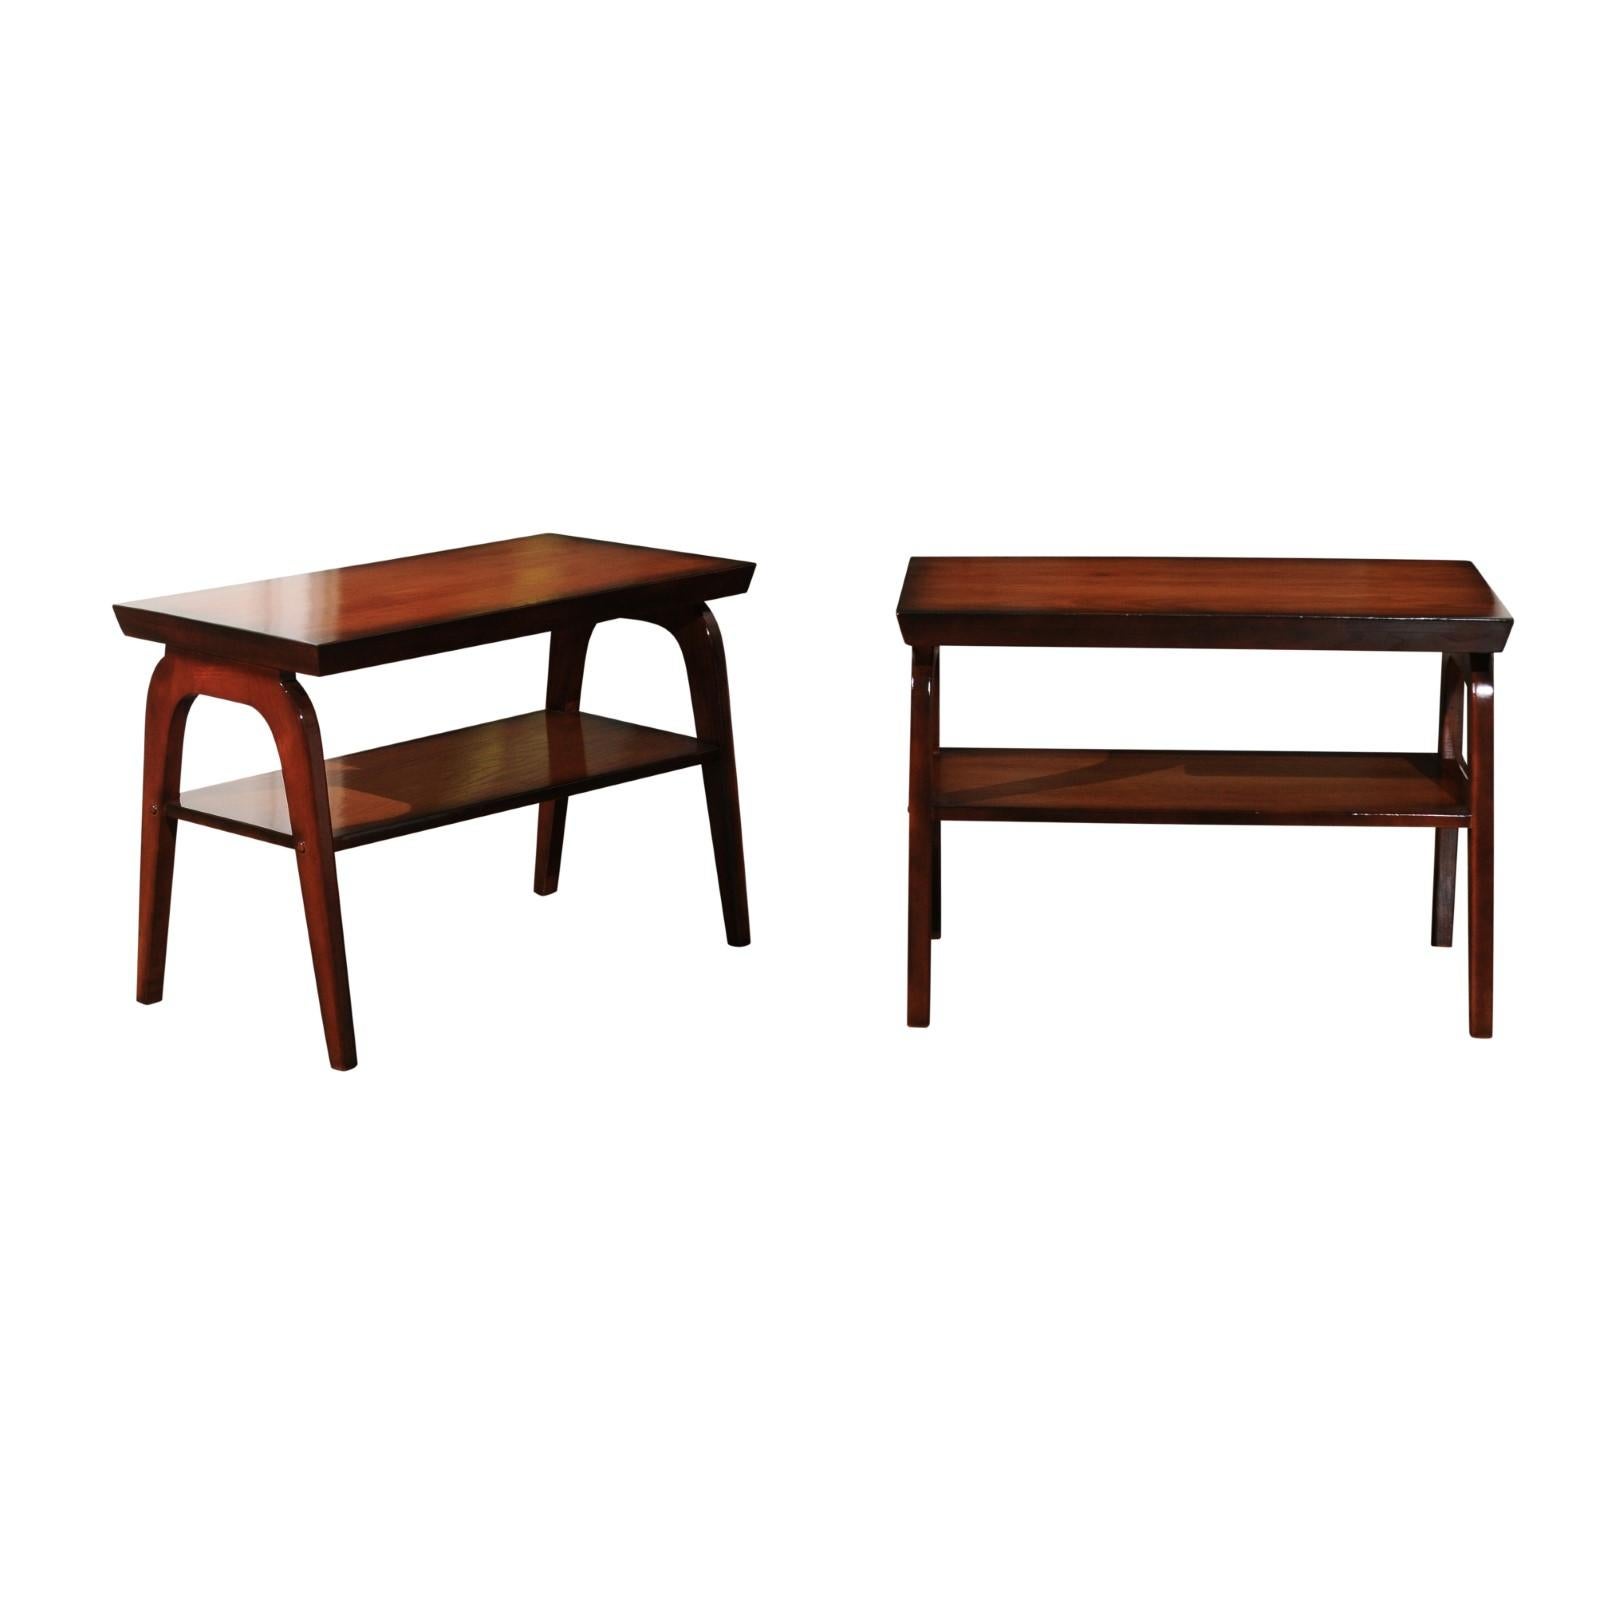 Rare Restored Pair of End Tables by John Wisner for Ficks Reed, circa 1954 For Sale